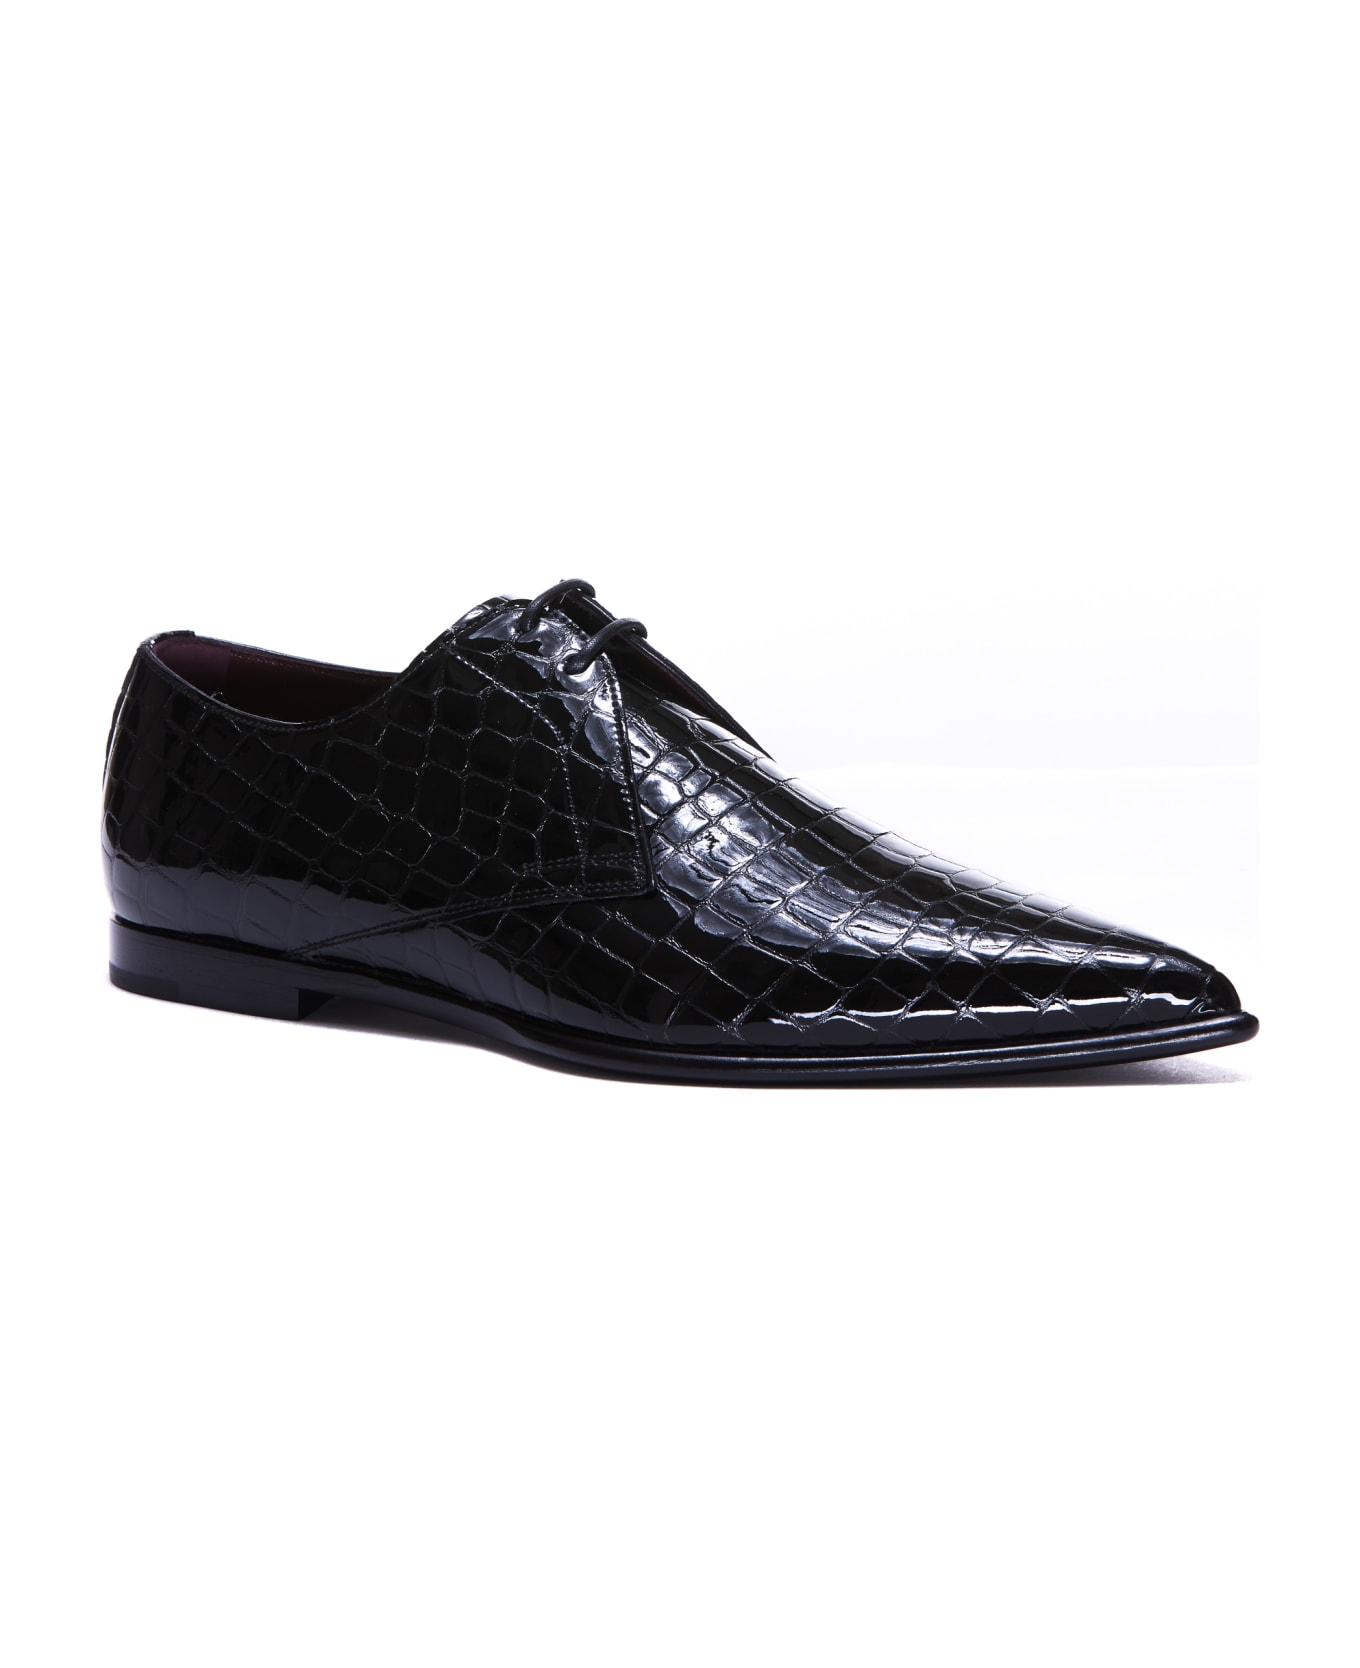 Dolce & Gabbana Derby Lace Up create Shoes - Black